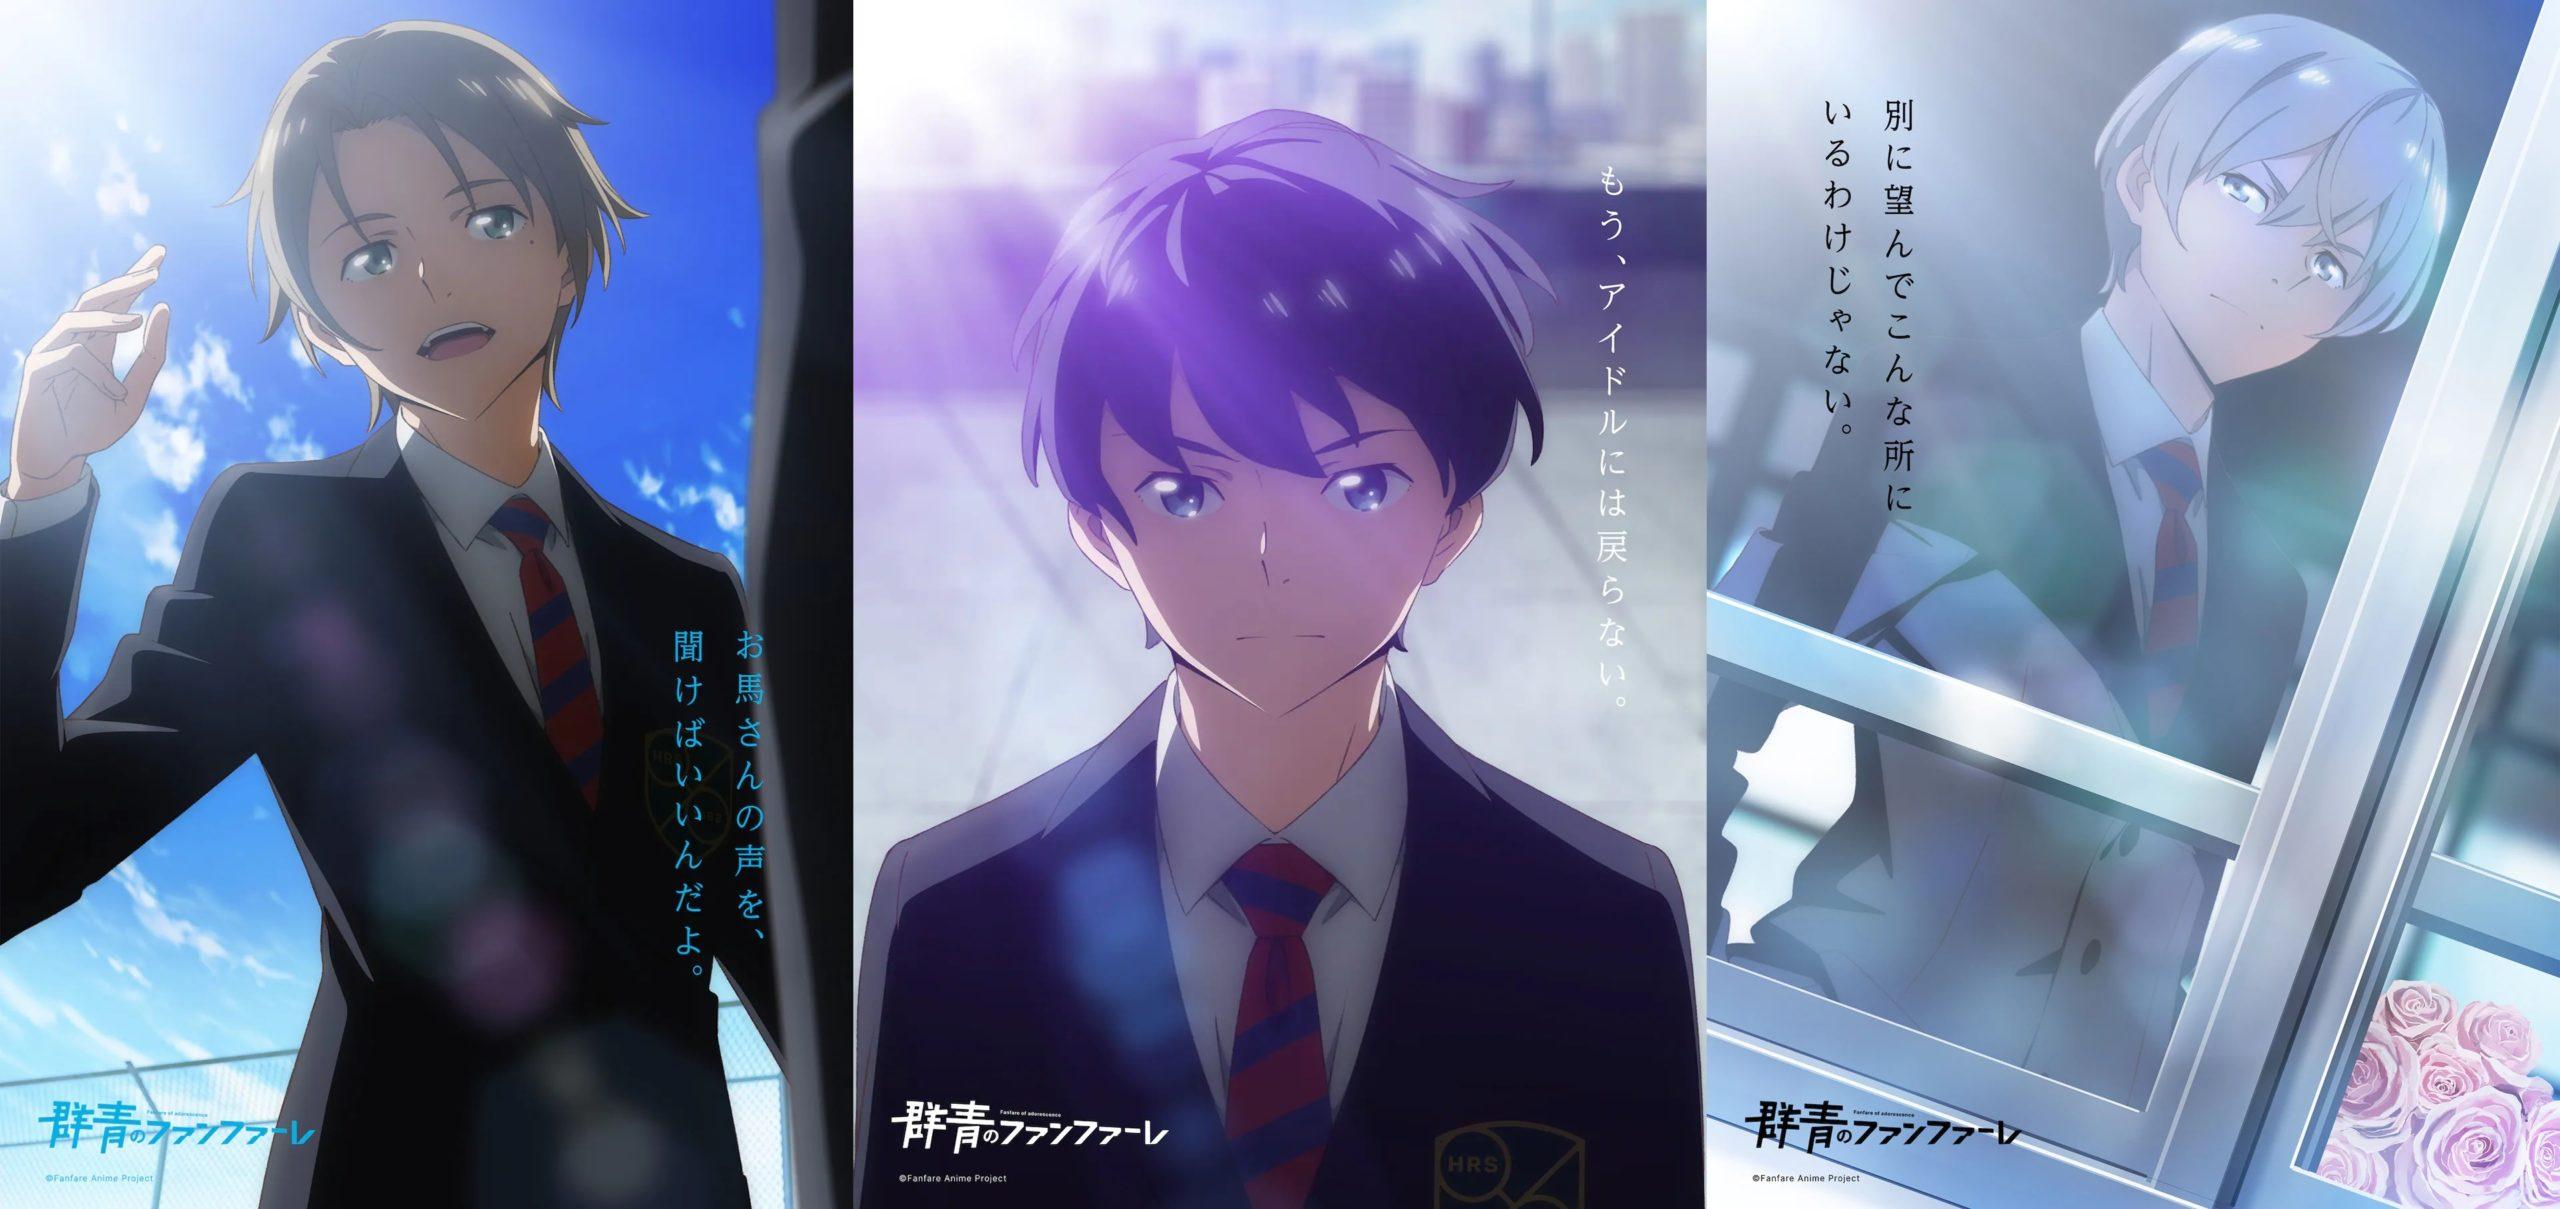 Fanfare of Adolescence Anime Lines Up OP and ED Performers thumbnail